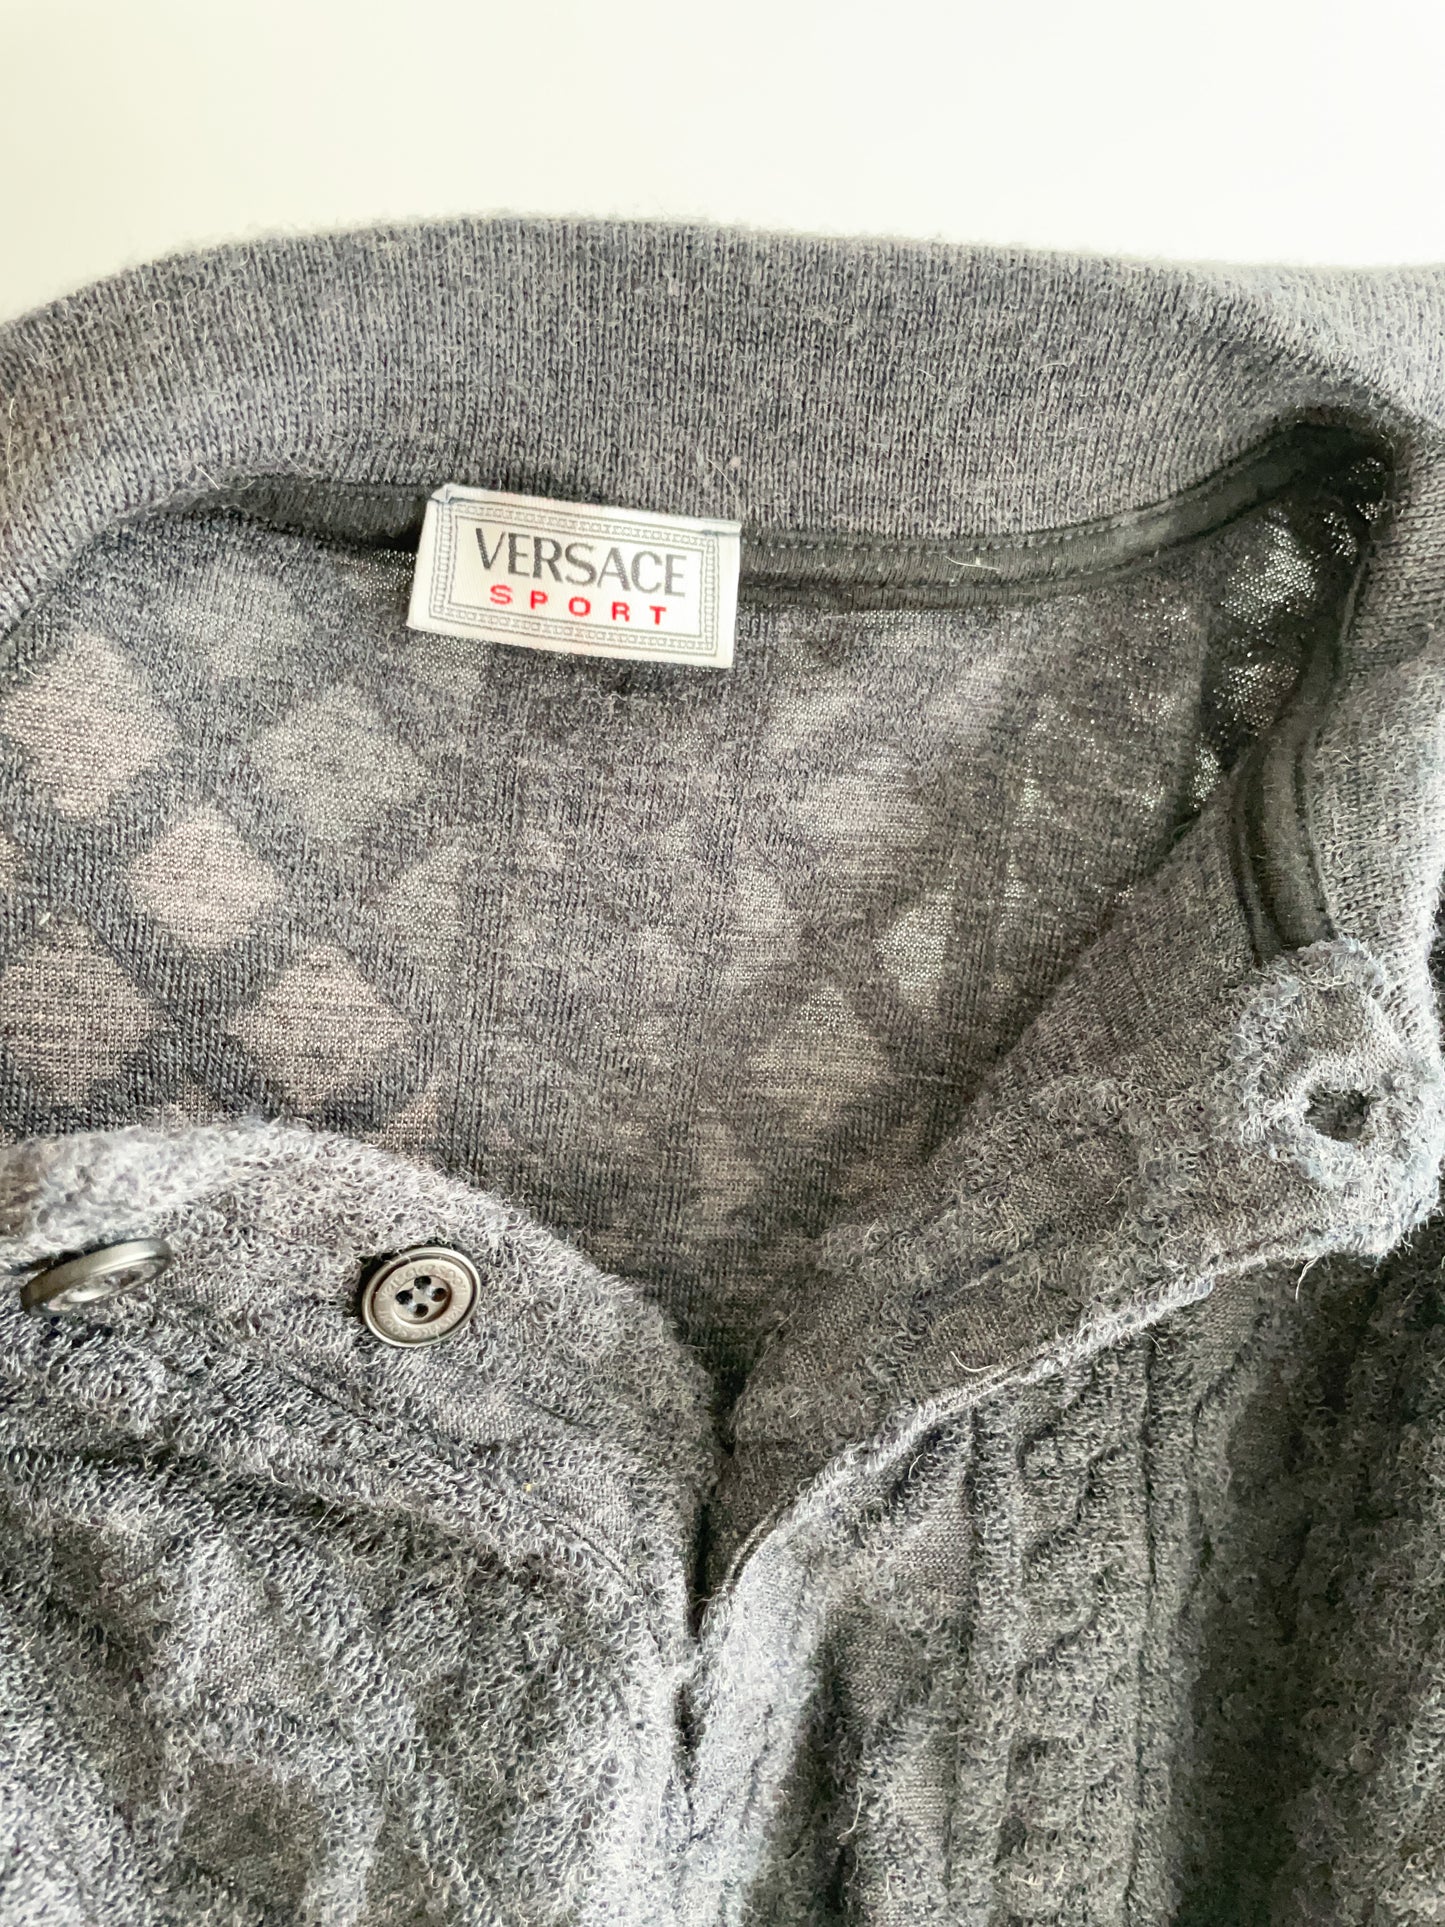 Versace Sport Grey Cable Knit Pattern Wool Collar Sweater - XL